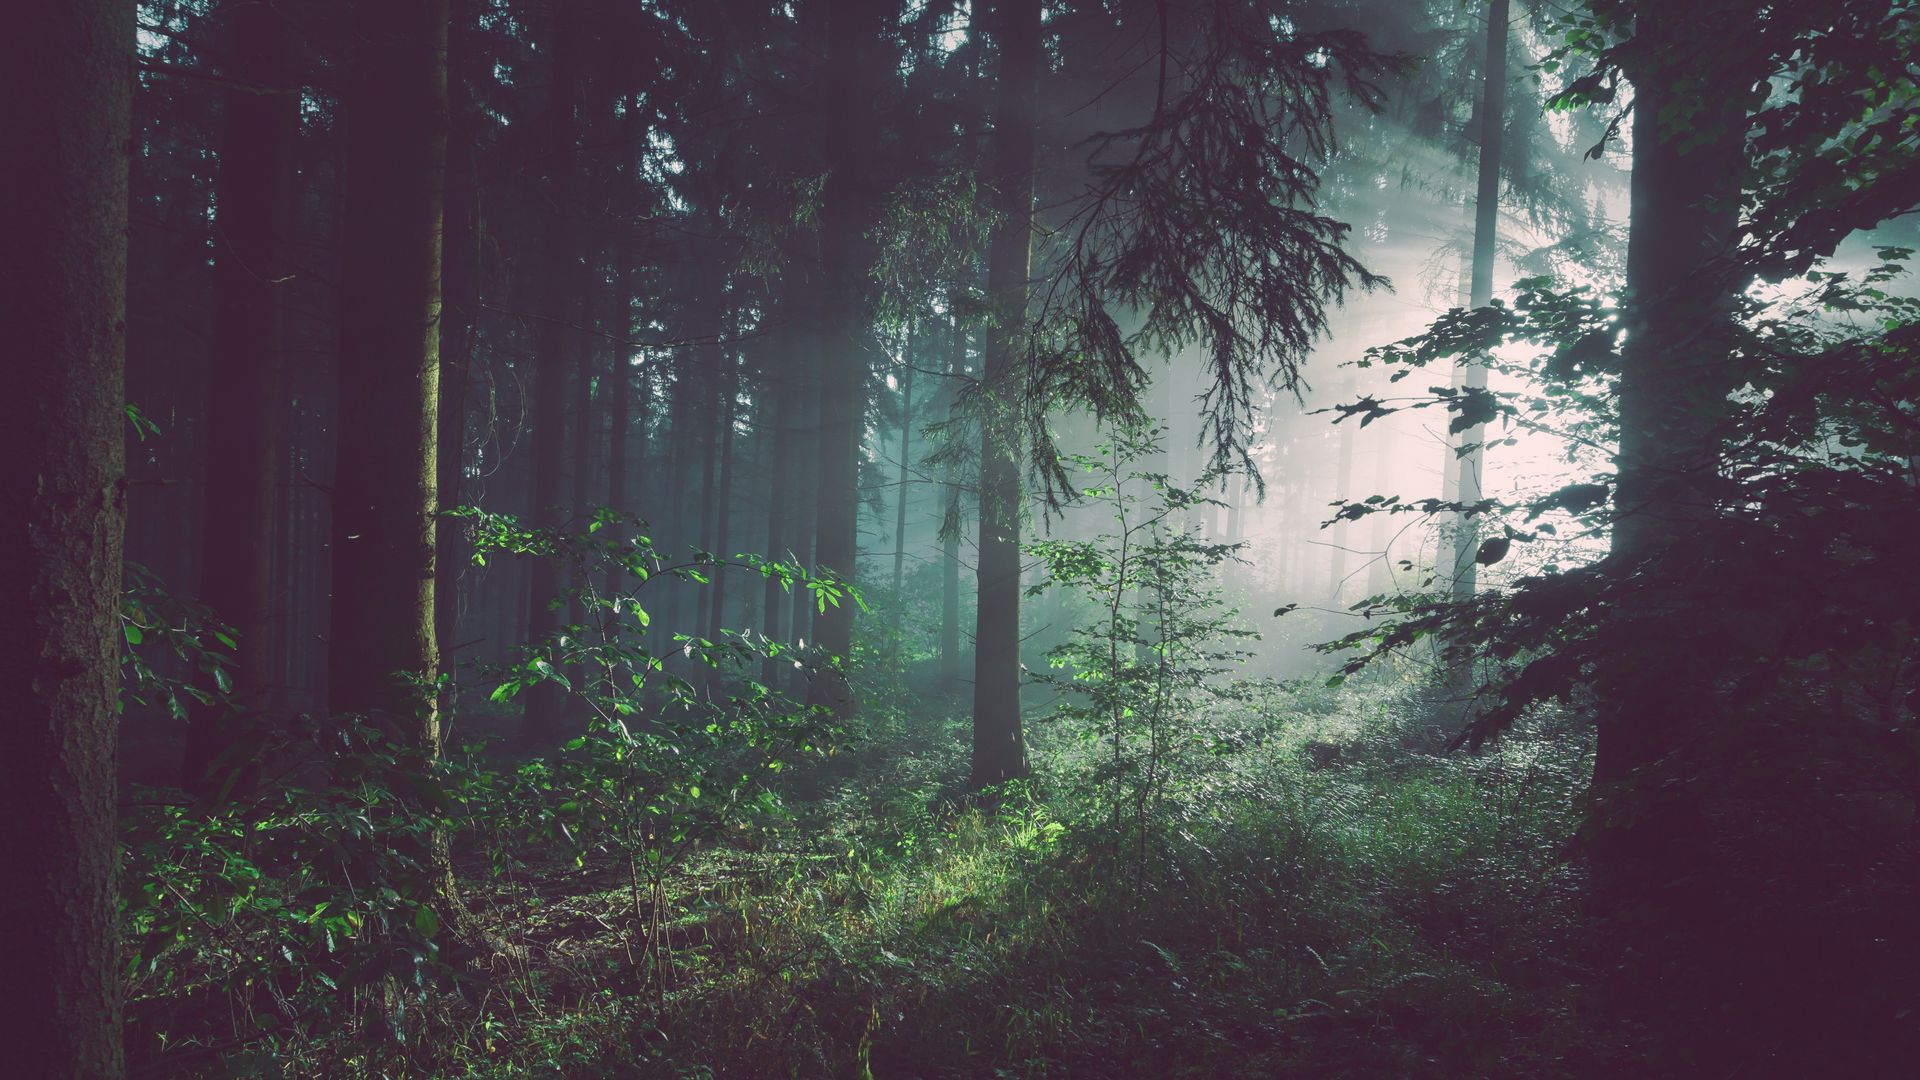 Download wallpaper 1920x1080 forest, trees, fog full hd, hdtv, fhd, 1080p hd  background